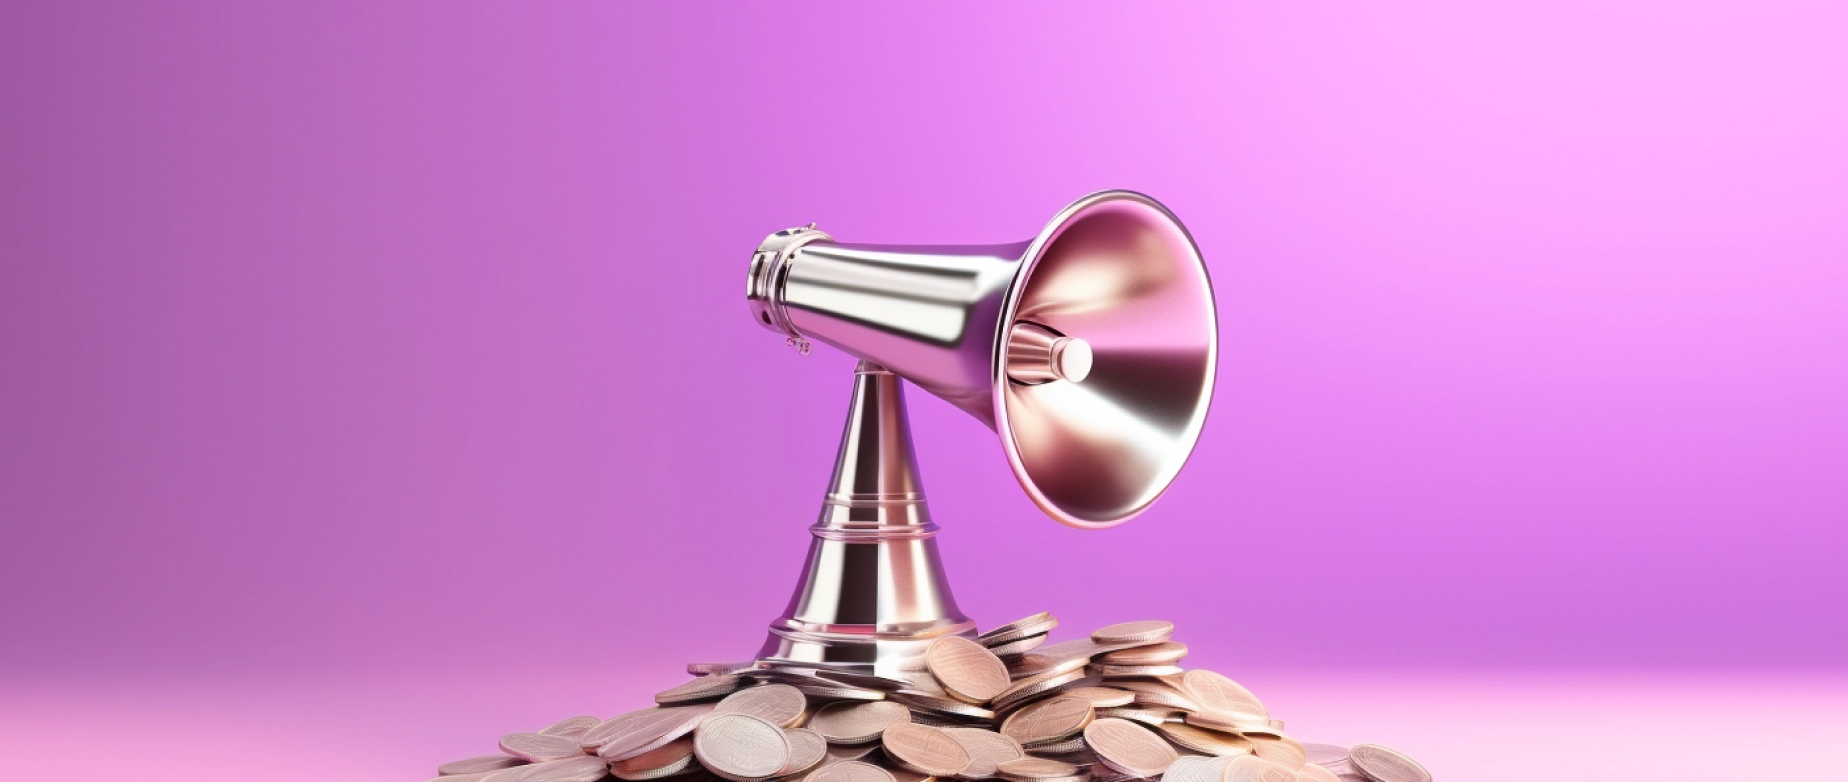 A shiny megaphone sitting on a pile of coins against a pink background.